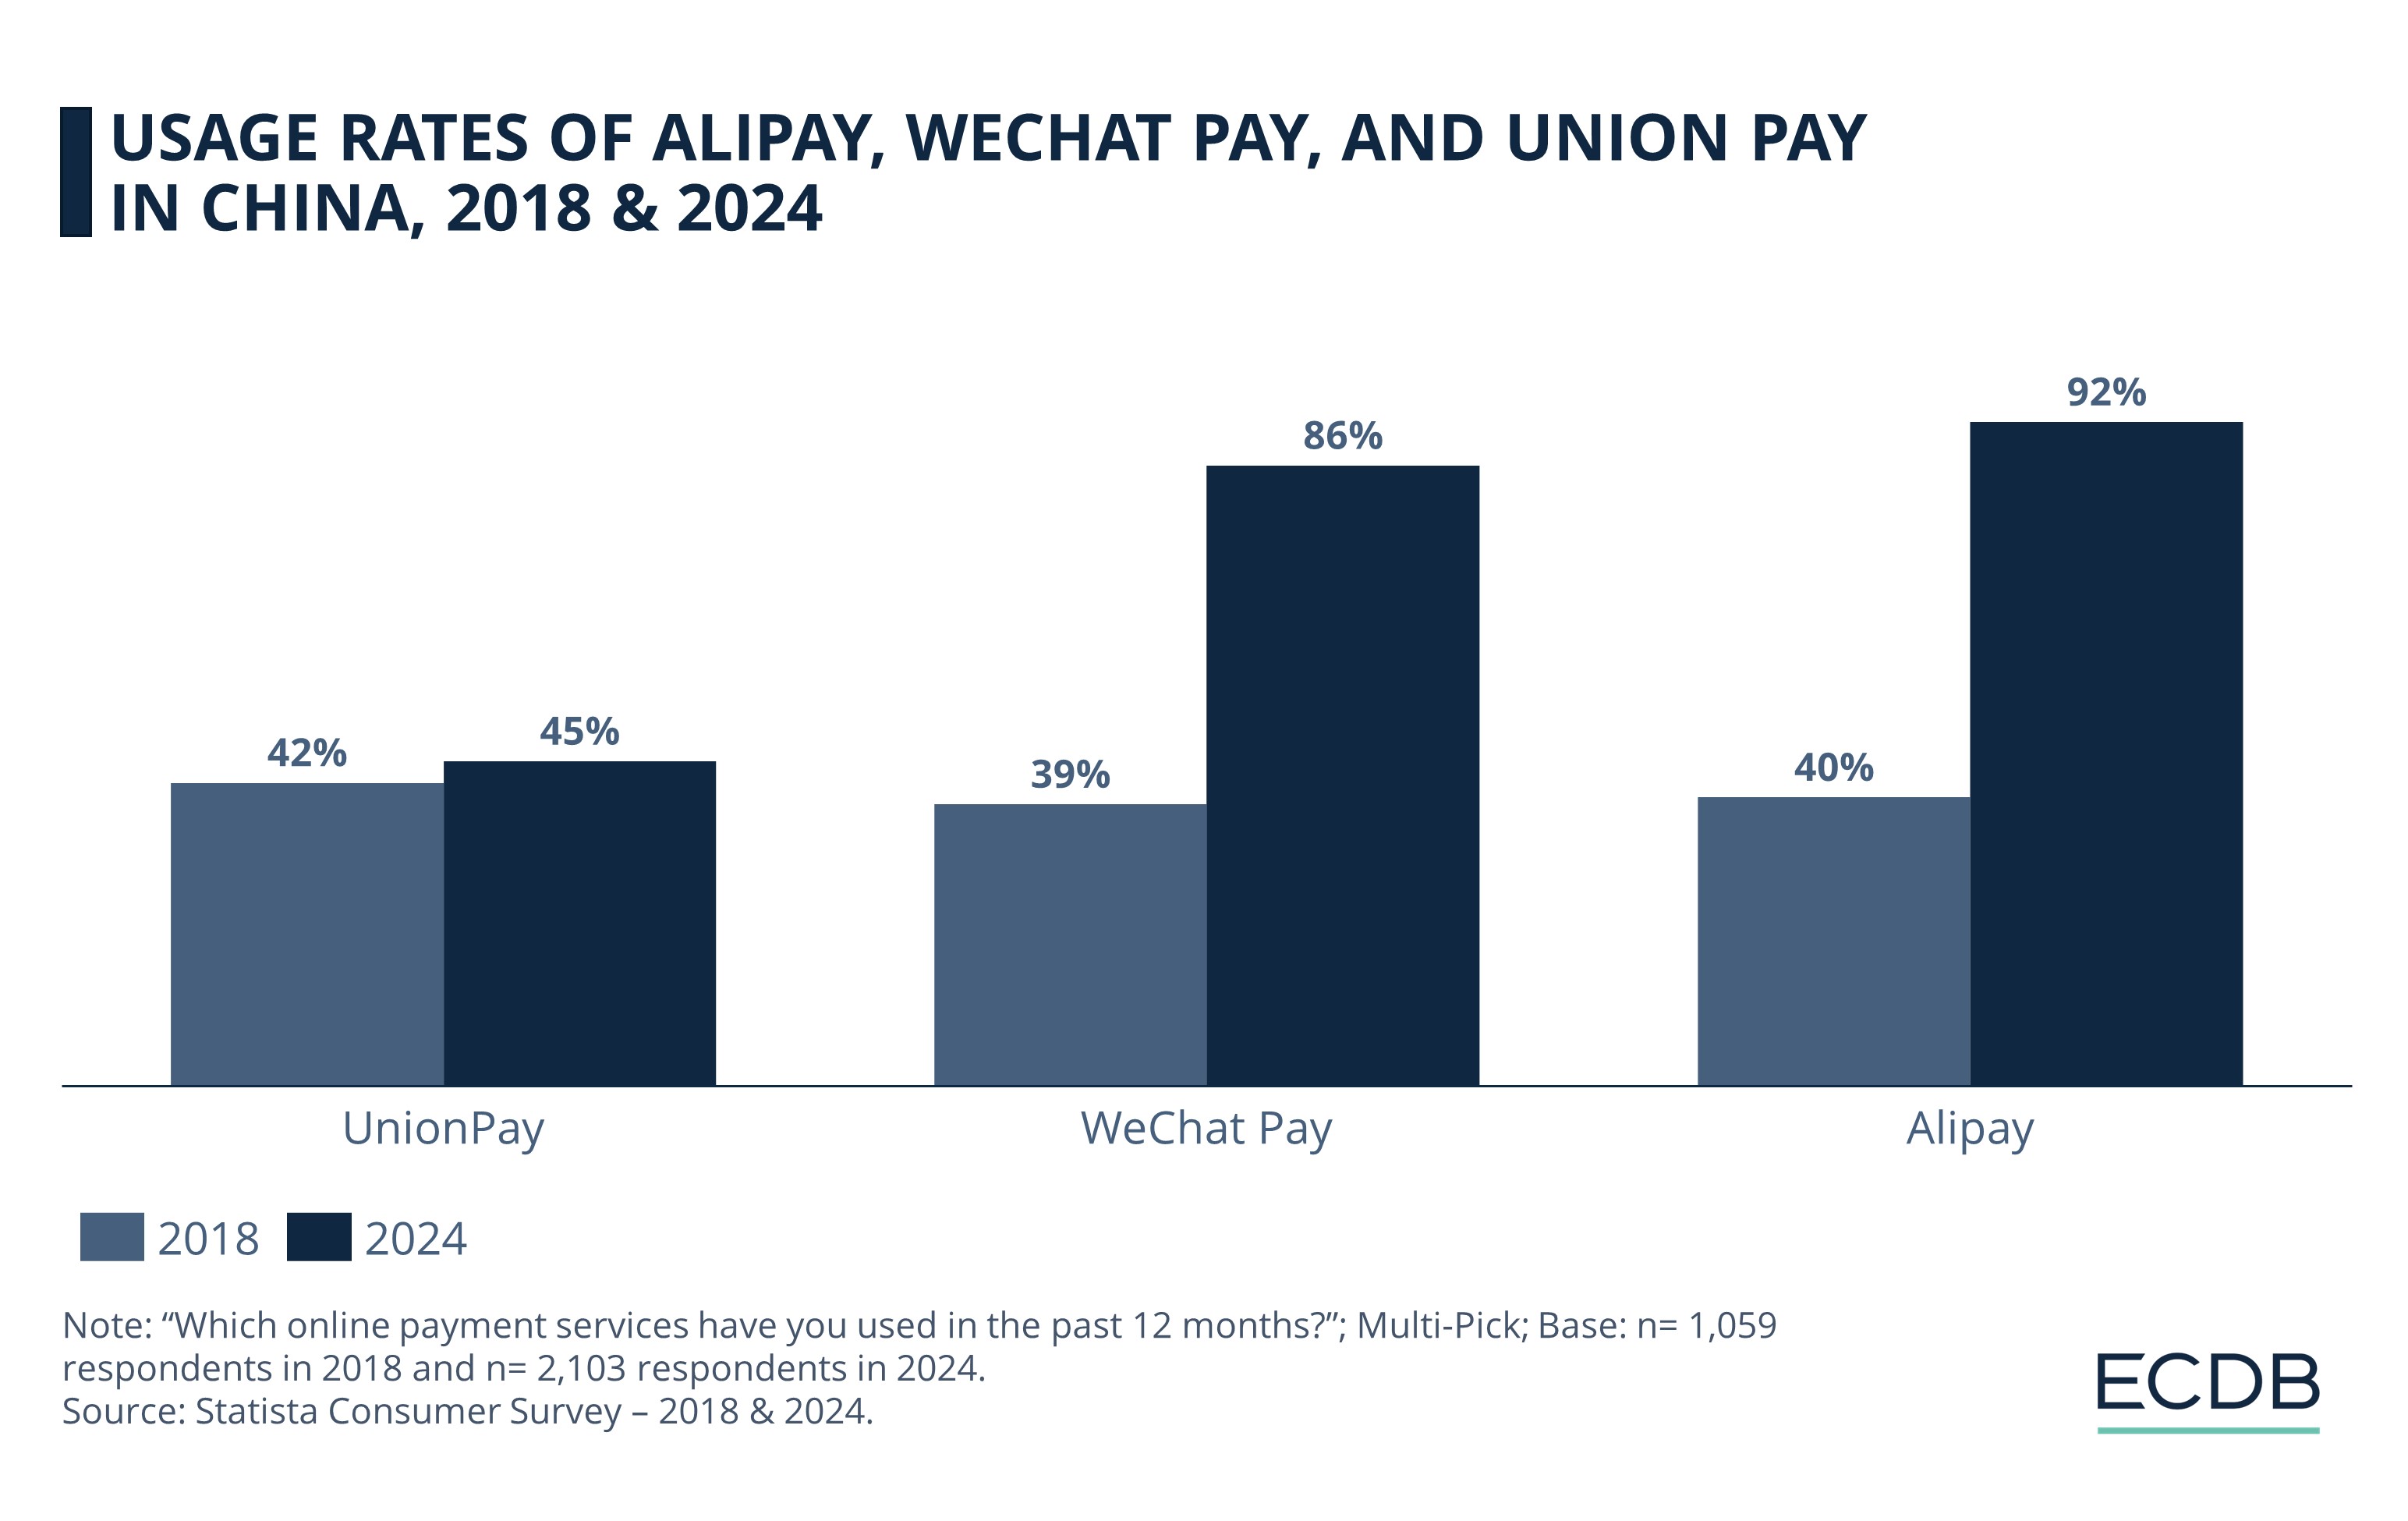 Usage Rates of Alipay, WeChat Pay, and Union Pay in China, 2018 & 2024